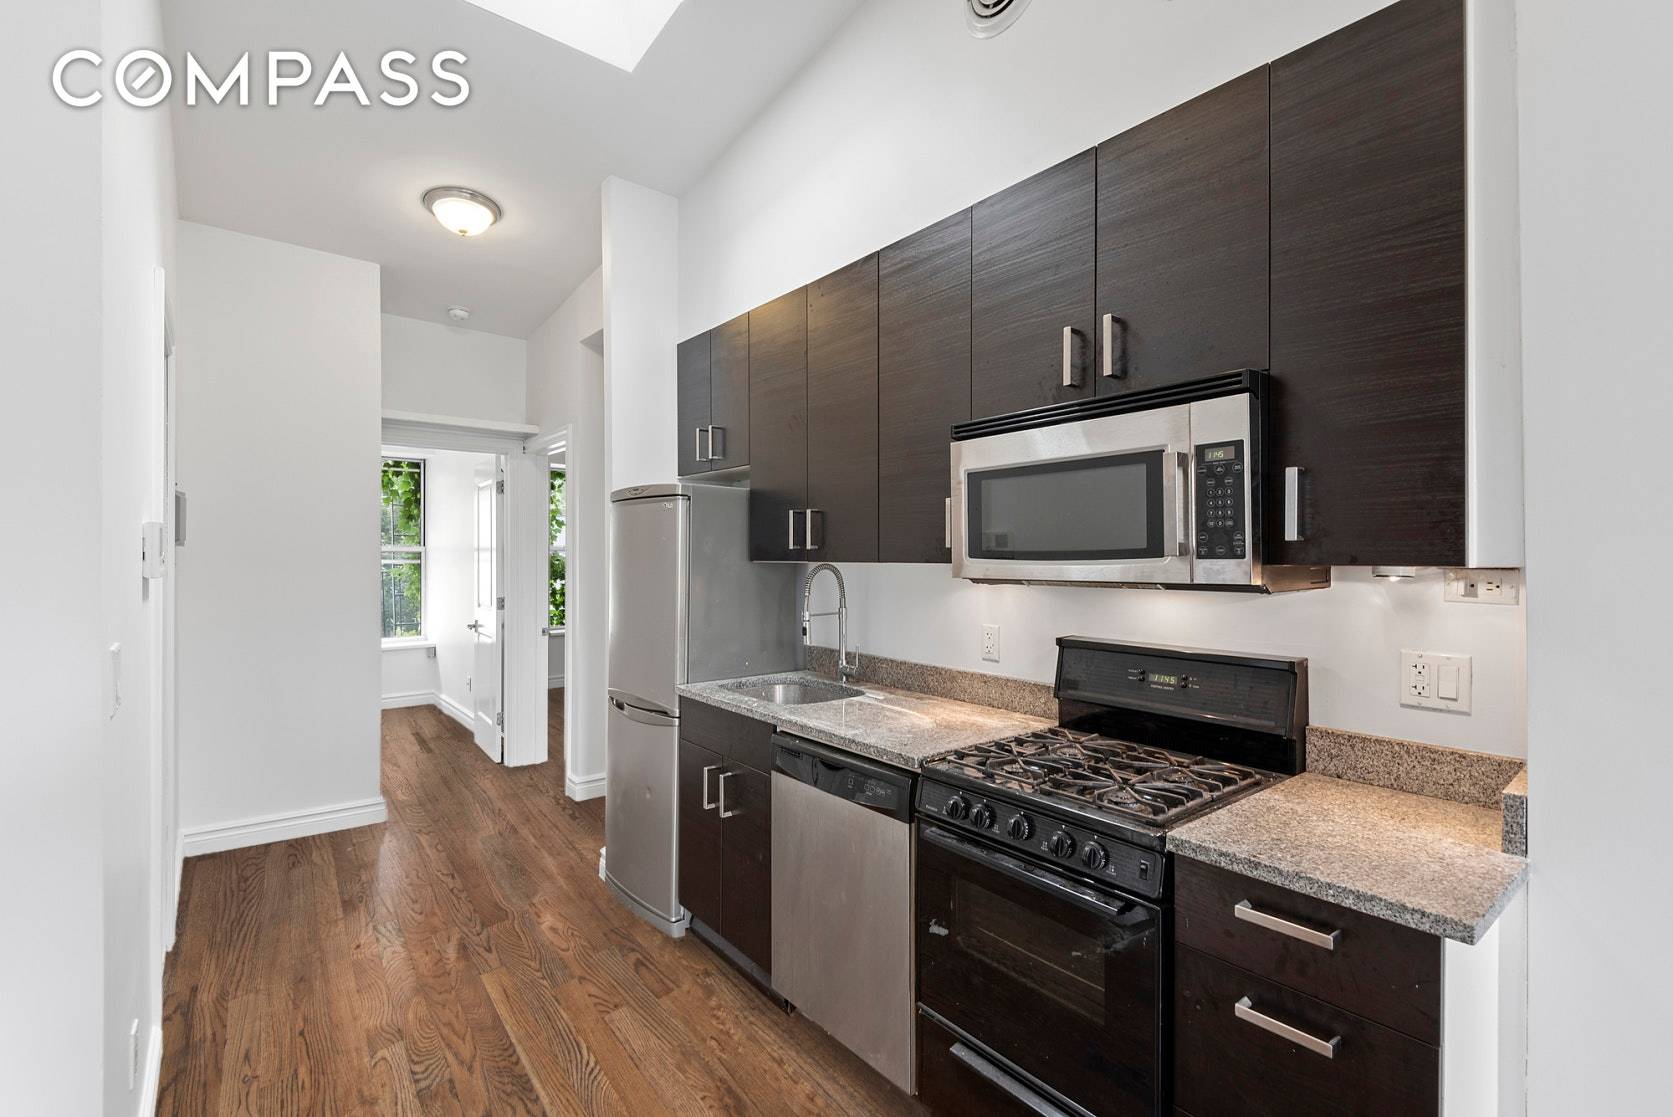 Available August 1st ! Gut Renovated 3 Bedroom, 2 Bath with master bedroom and extended ceiling heights in Williamsburg, instantly accessible to the Marcy providing great transit into Manhattan via ...